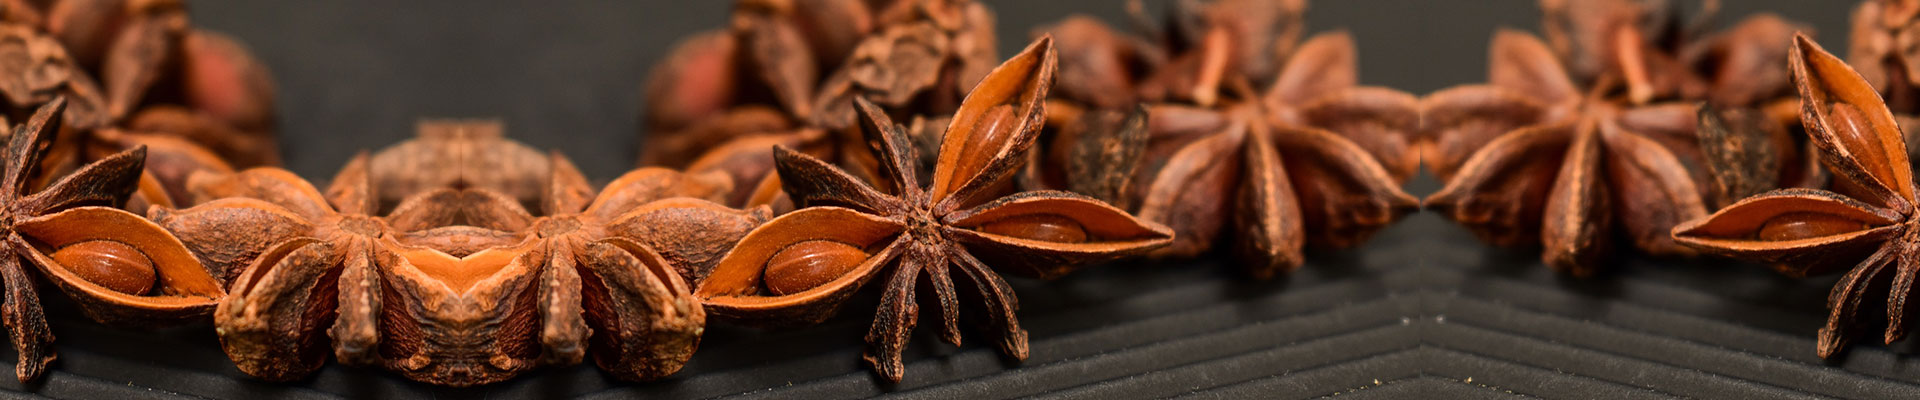 STAR ANISE-THE UNSUNG SPICE